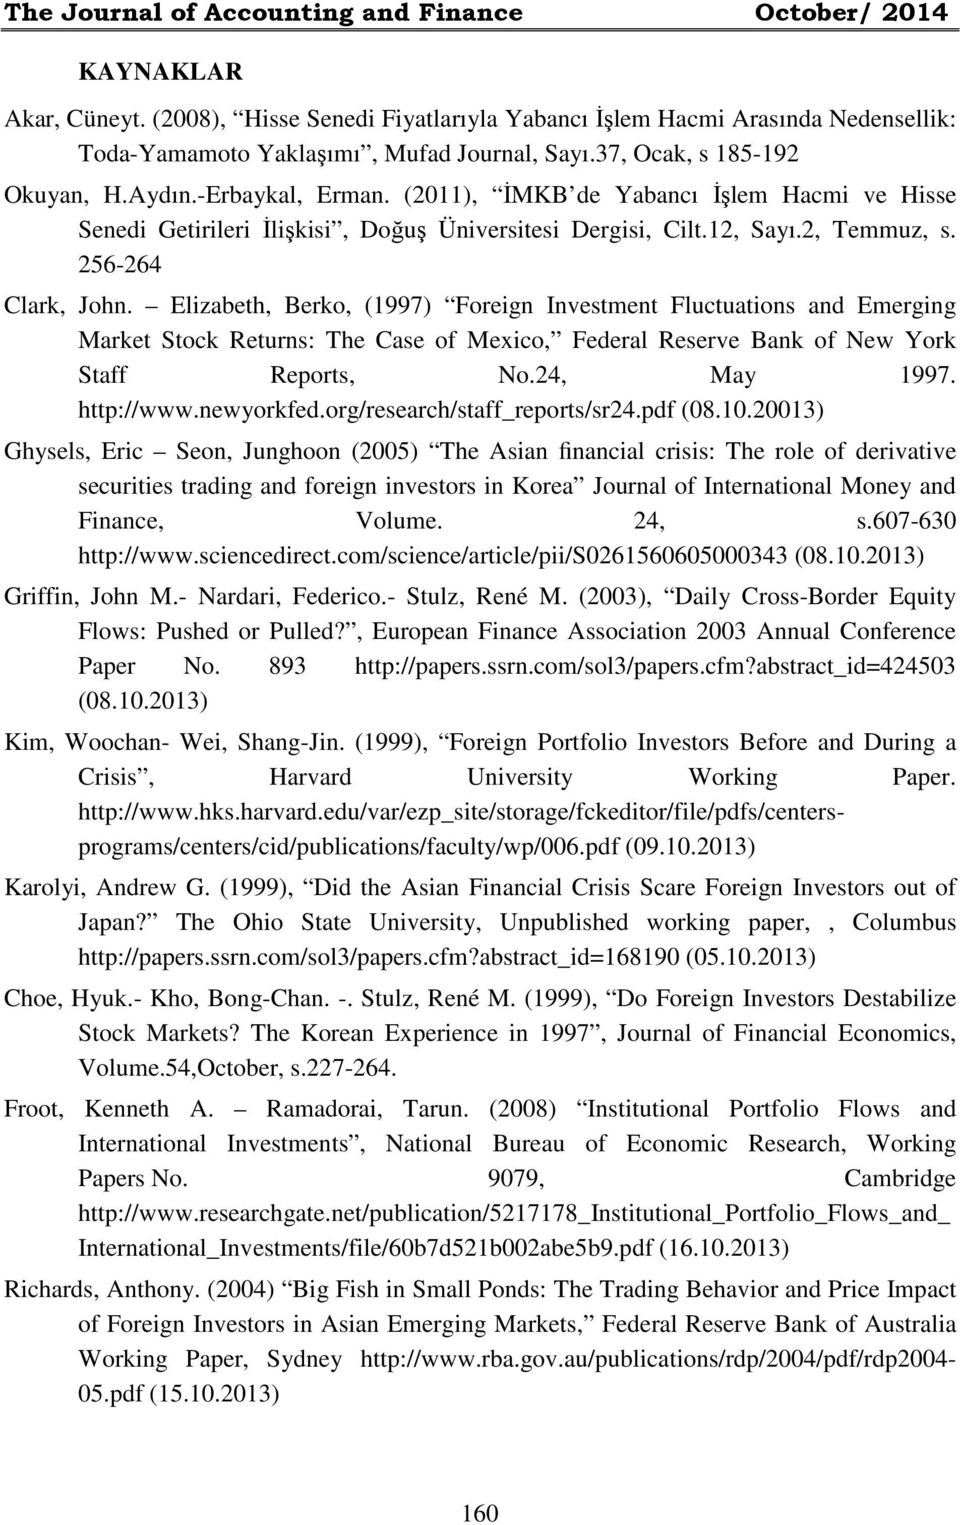 256-264 Clark, John. Elizabeth, Berko, (1997) Foreign Investment Fluctuations and Emerging Market Stock Returns: The Case of Mexico, Federal Reserve Bank of New York Staff Reports, No.24, May 1997.